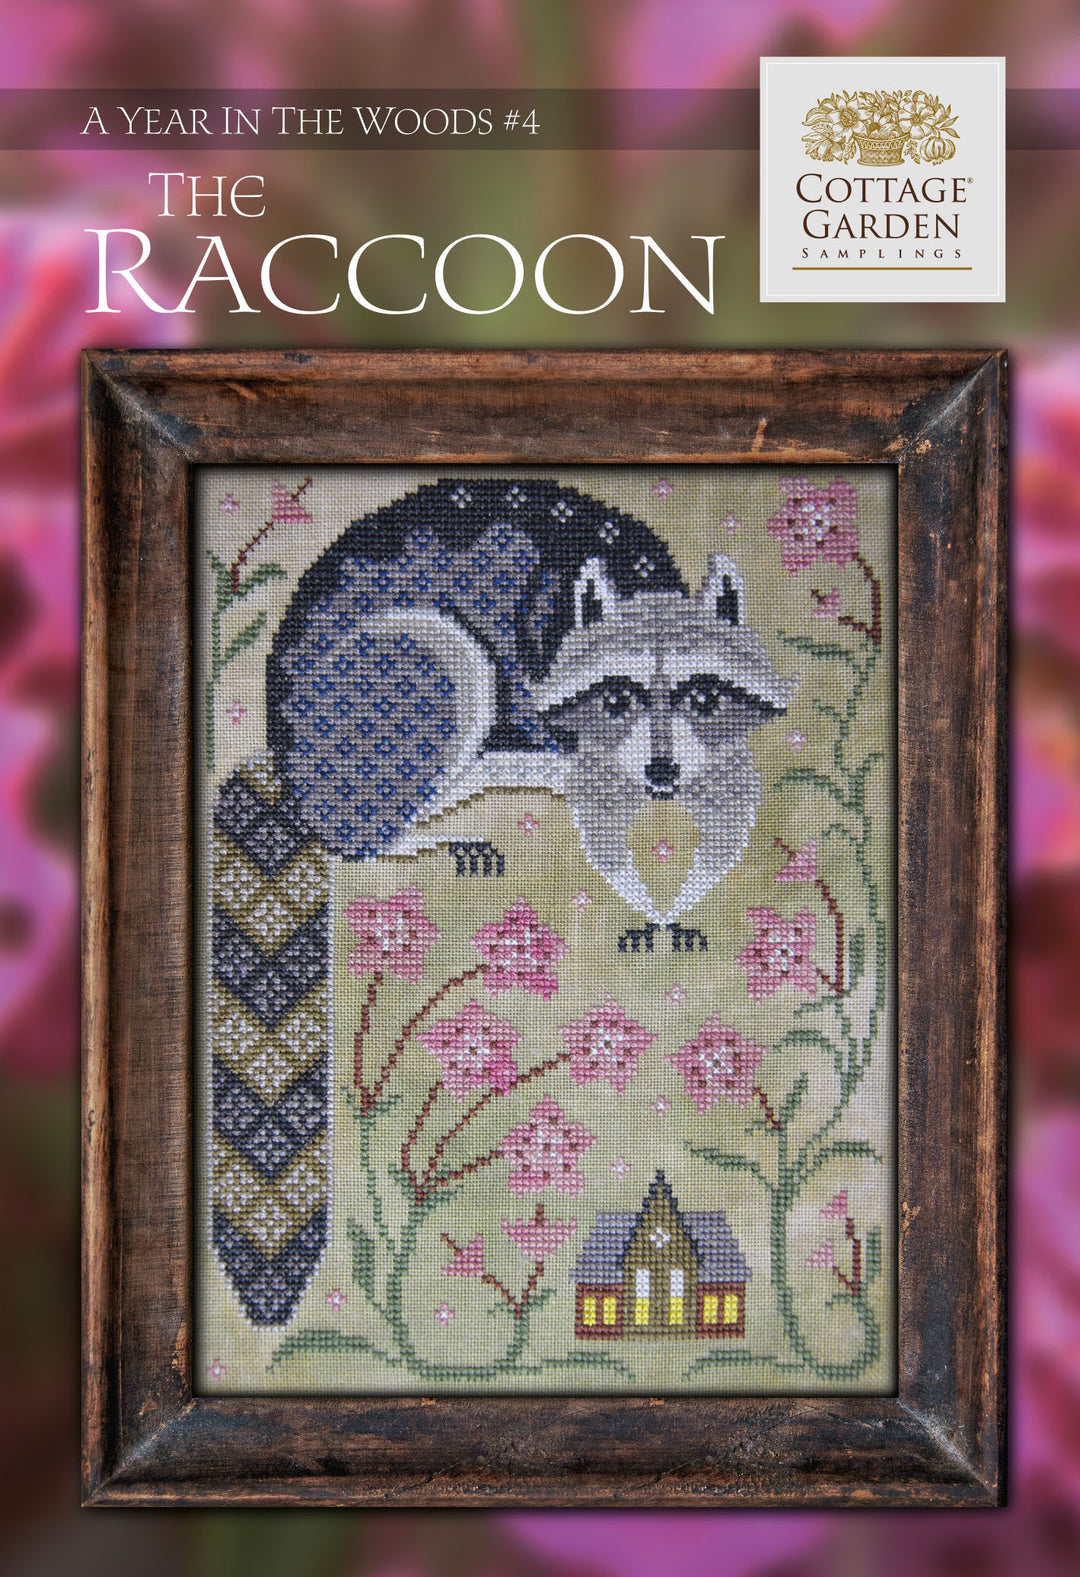 The Raccoon, A Year in the Woods #4 | Cottage Garden Samplings